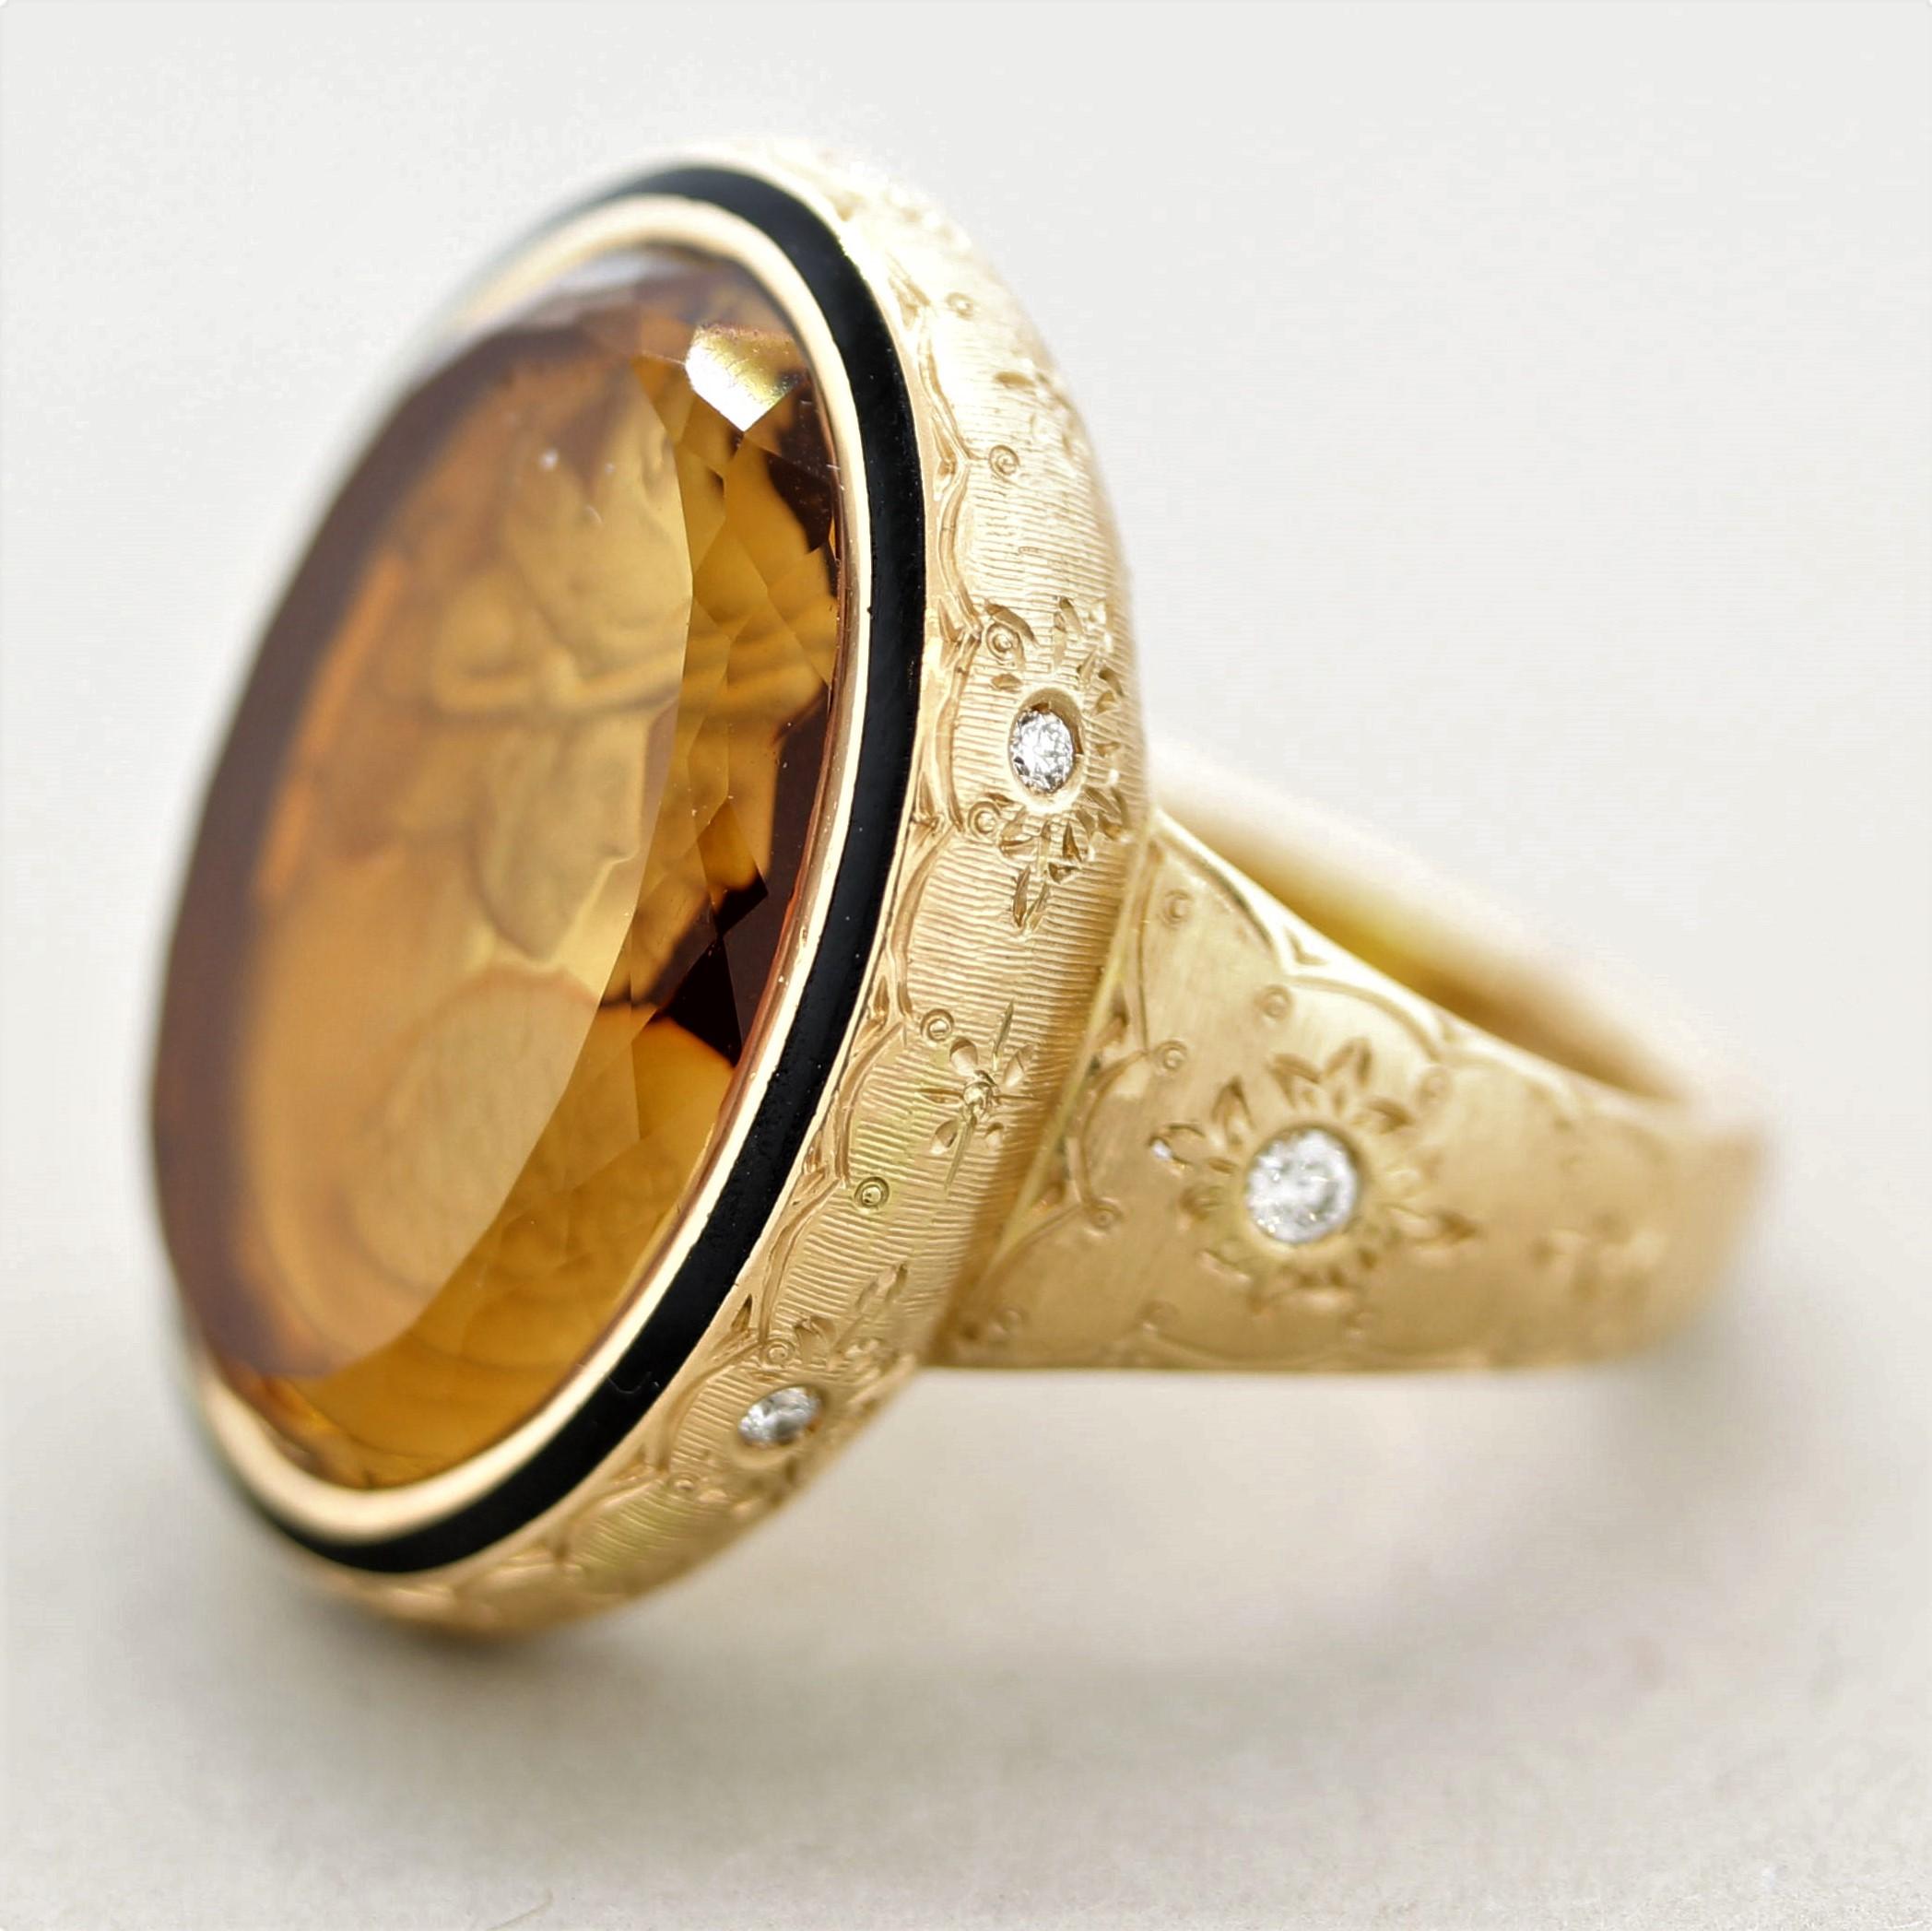 A modern ring made in the antique style! It features a 11.75 carat citrine cameo hand-carved with the relief of a noble gentleman. It is accented by a black enamel halo as well are 0.12 carats of round brilliant-cut diamonds set around the ring.